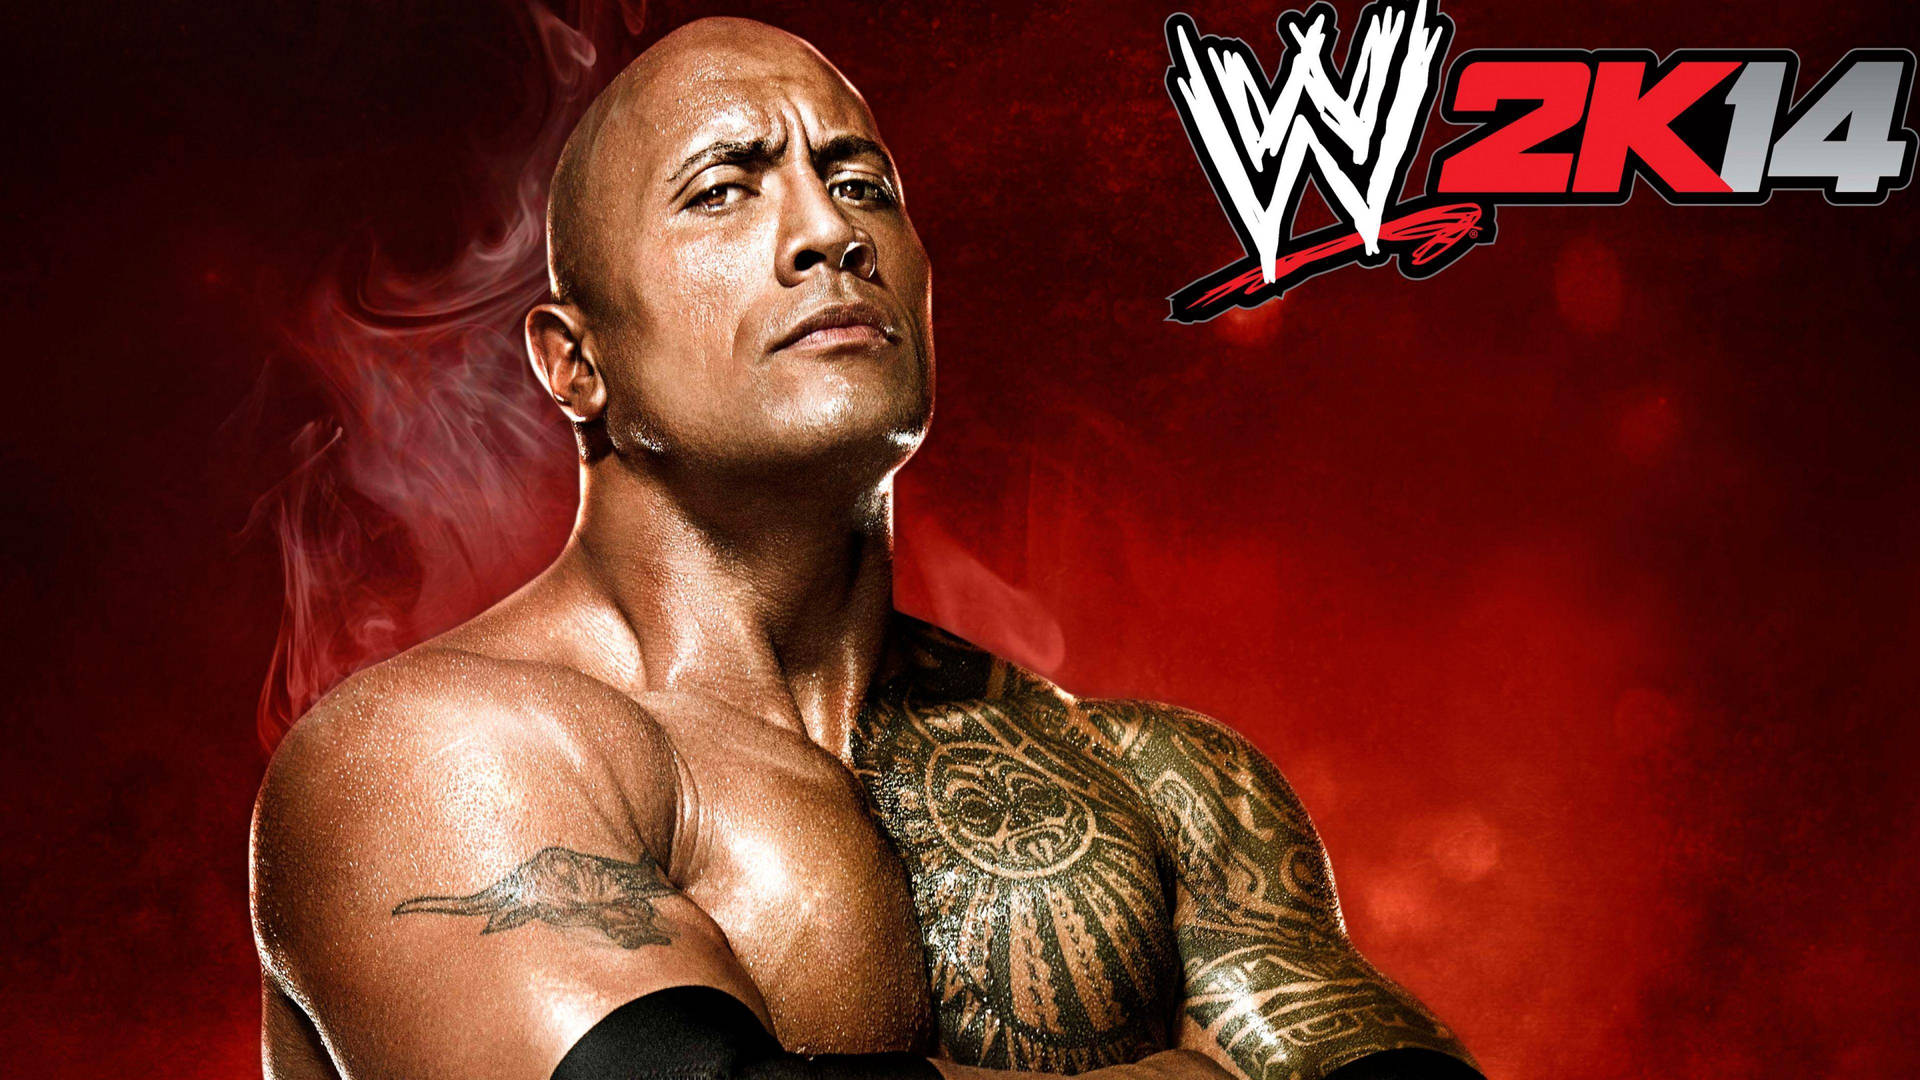 Wwe 2k14 - Bringing Professional Wrestling To Your Home Wallpaper